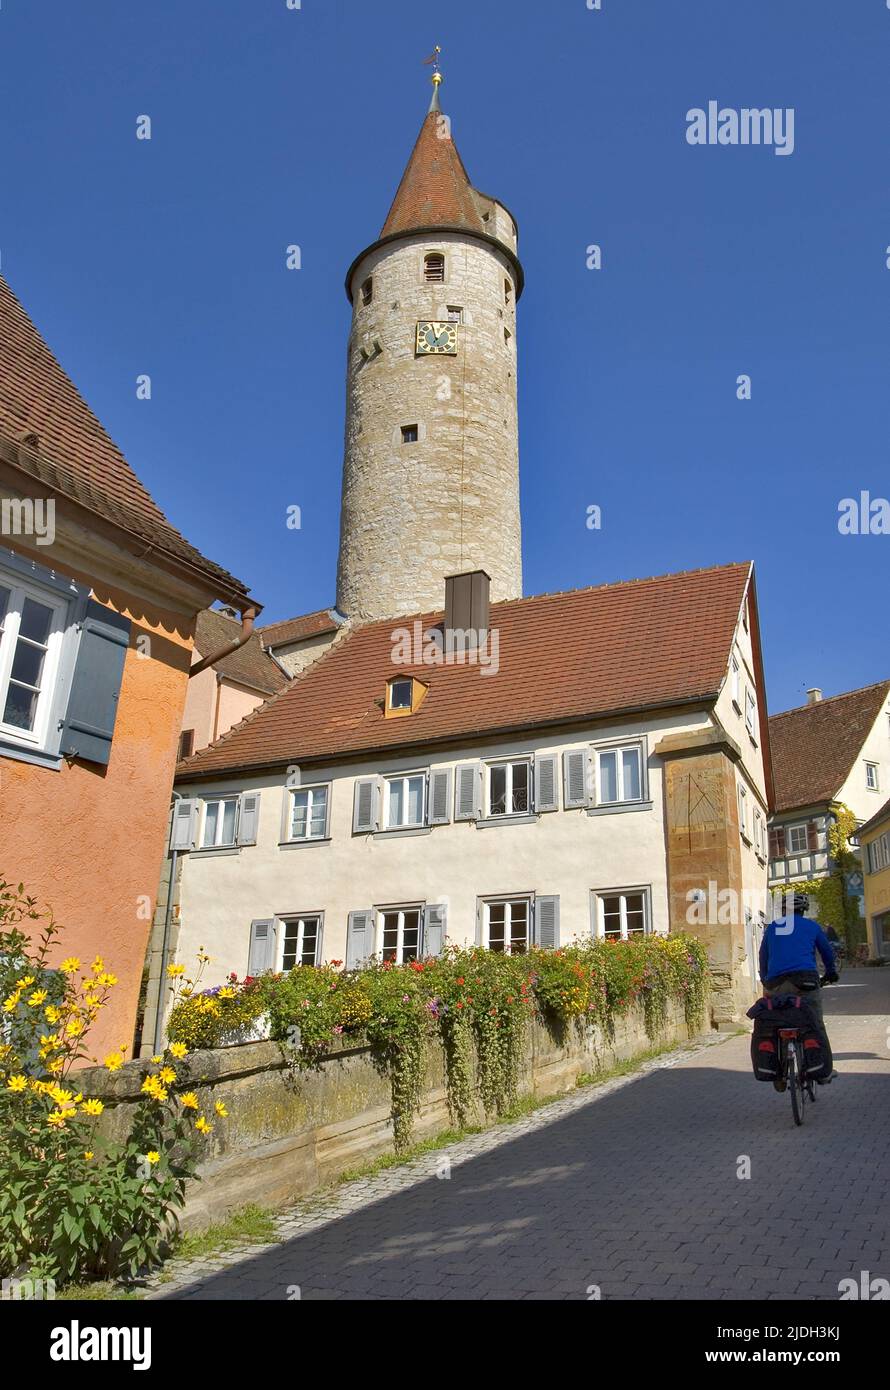 City tower in the old town, Germany, Baden-Wuerttemberg, Kirchberg an der Jagst Stock Photo